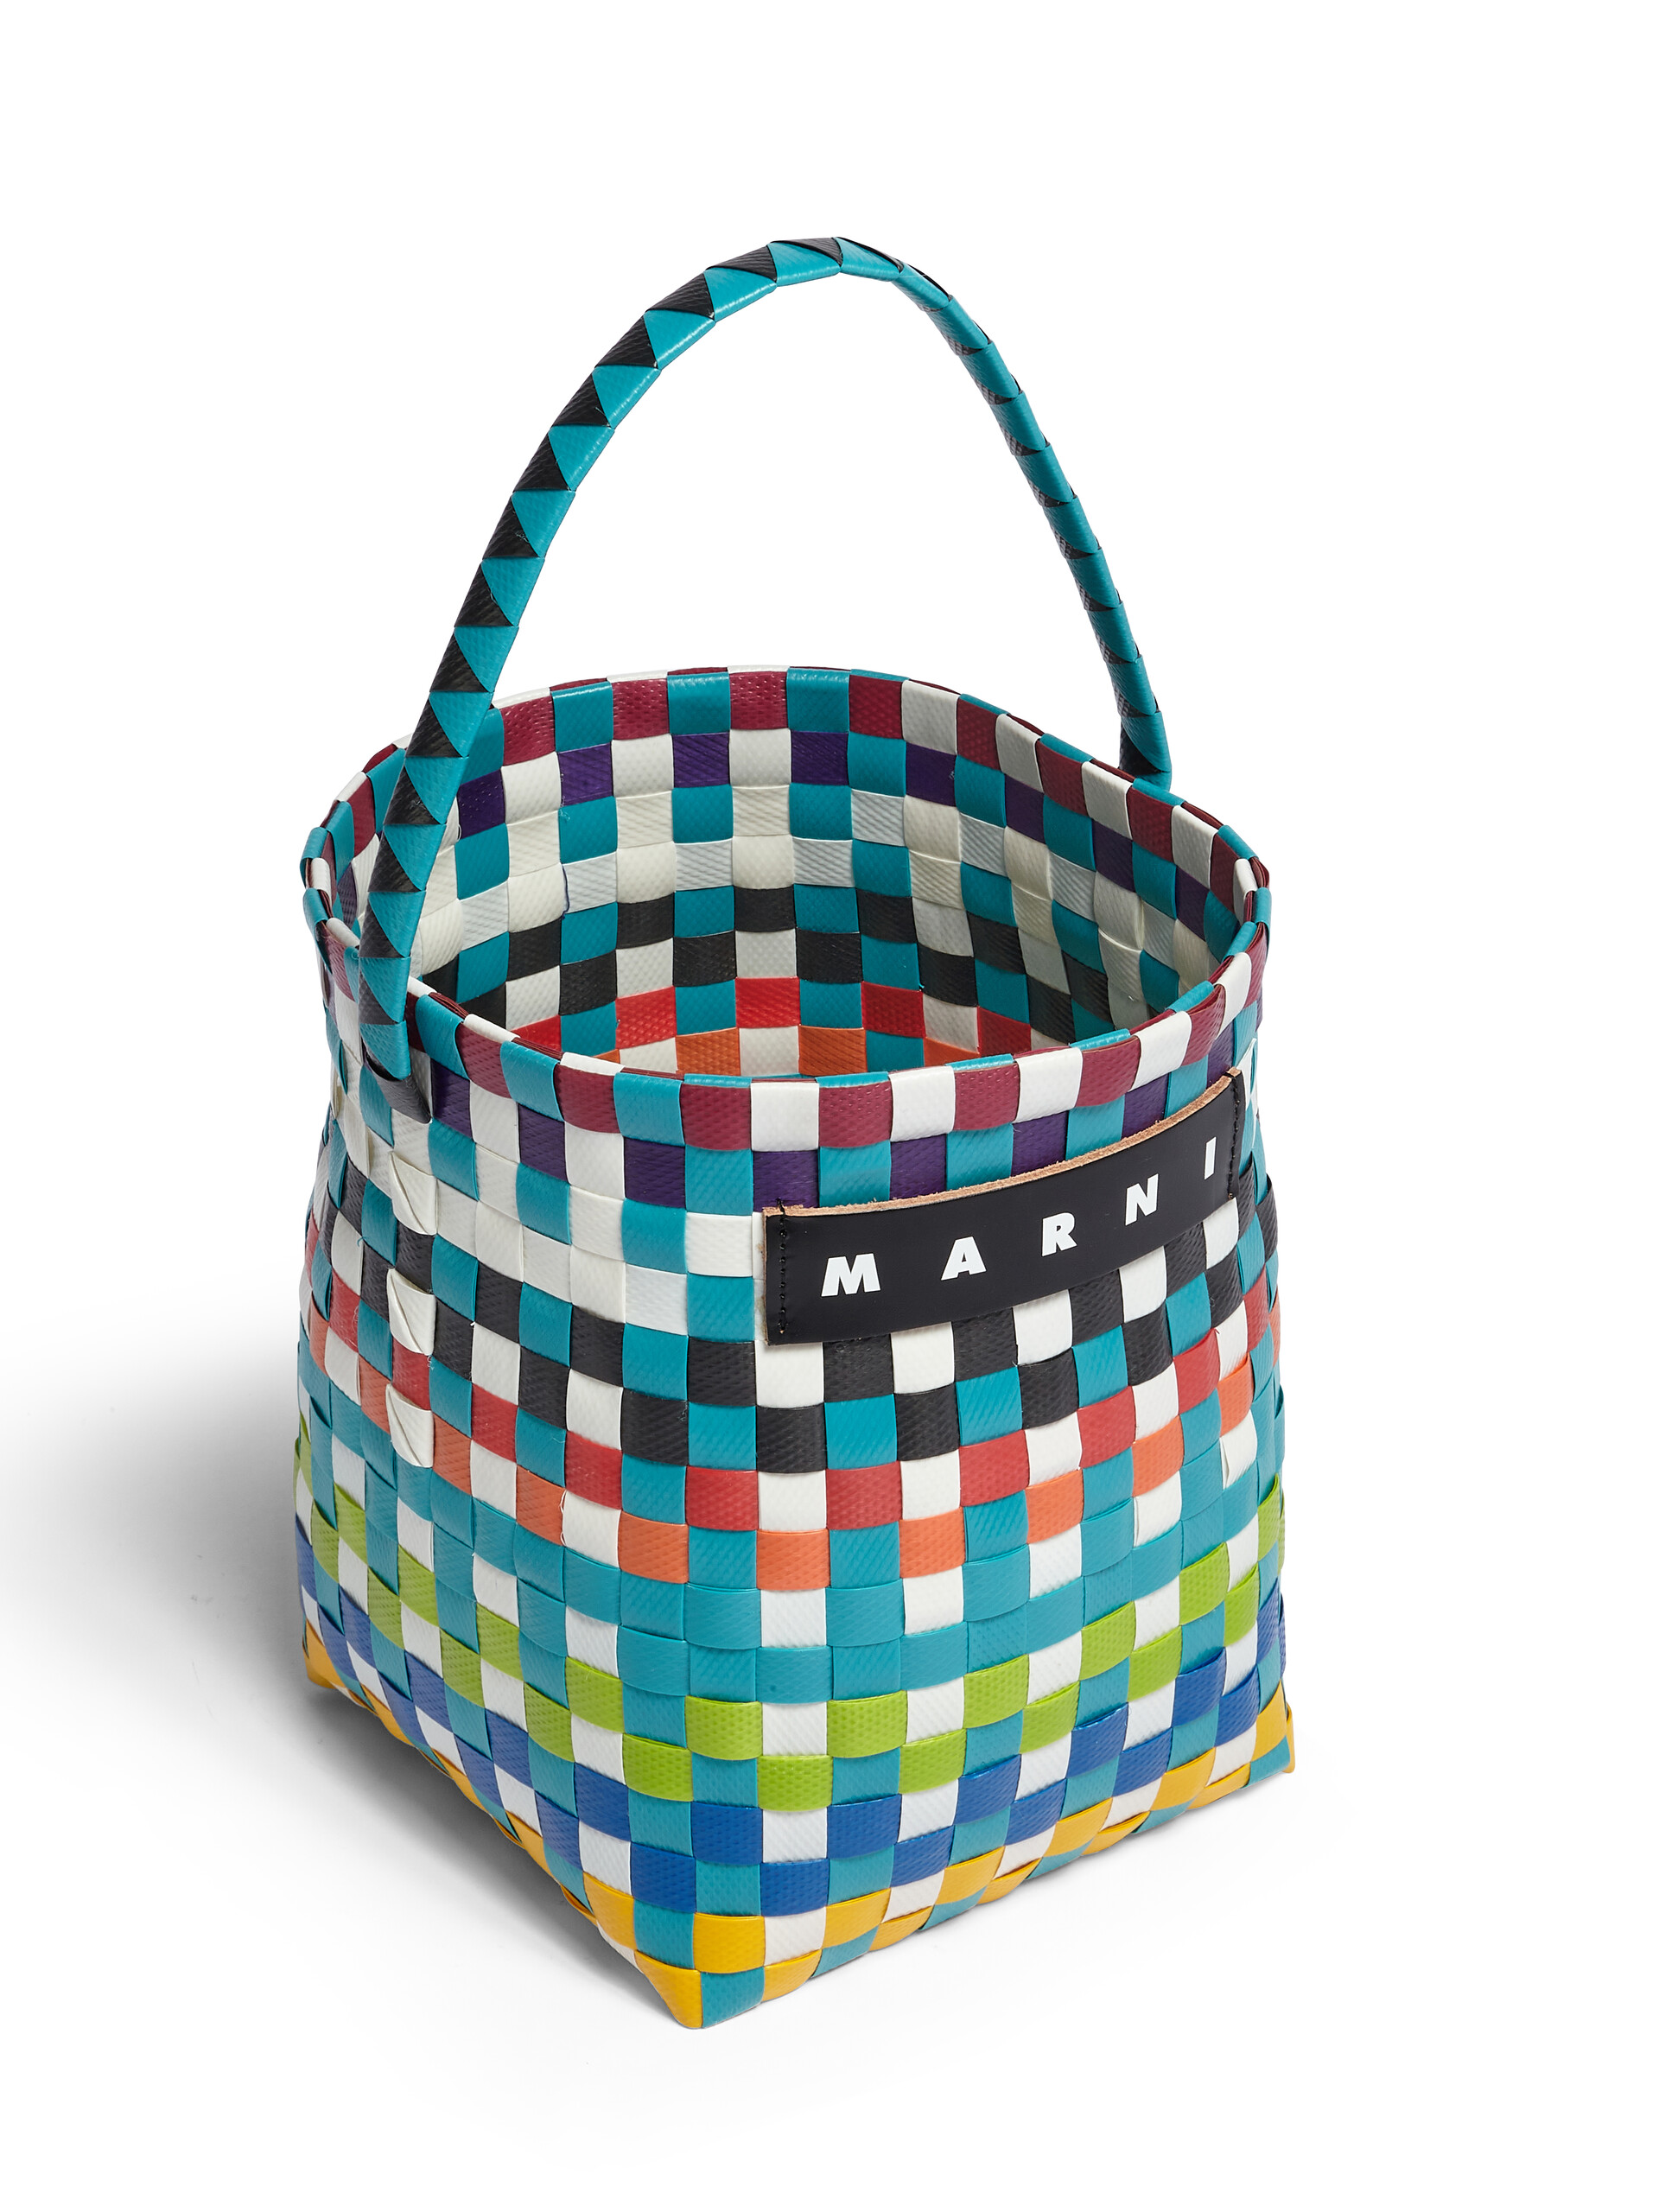 Marni-market - Marni Market Green and Red Basket - Accessories - Unisex